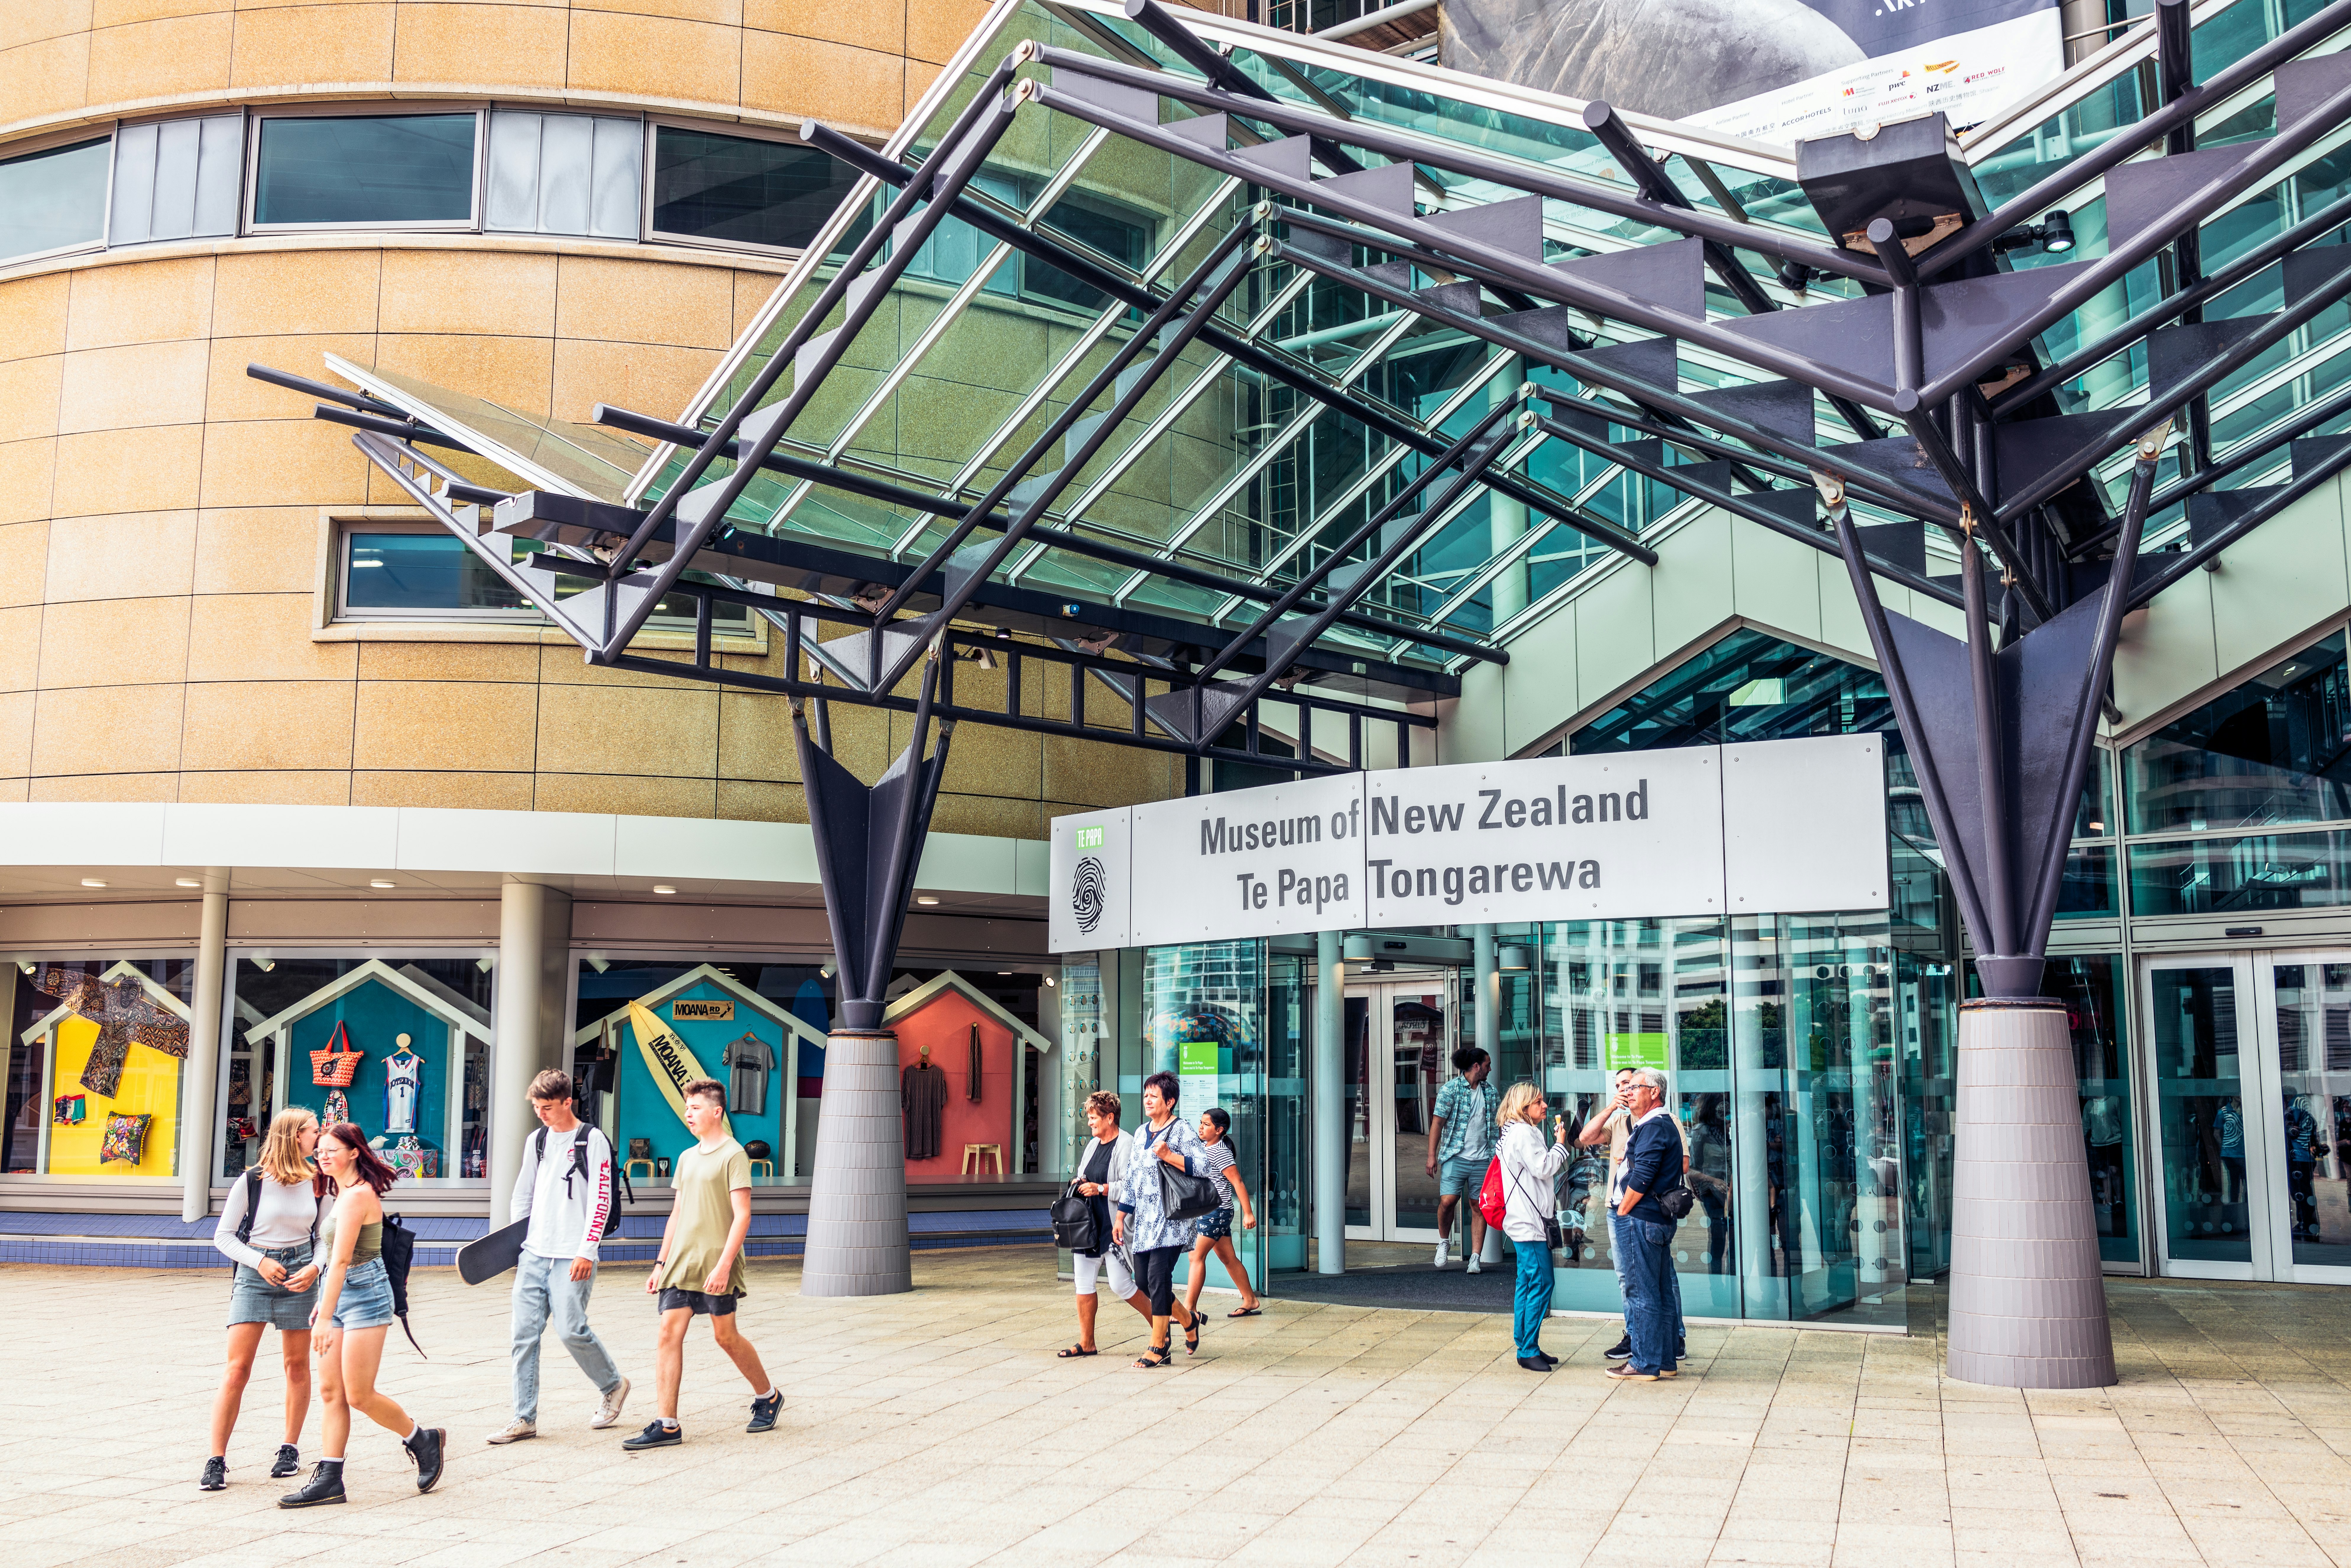 Visitors entering and leaving the Museum of New Zealand in Wellington; the sign also states the Māori name, Te Papa Tongarewa.